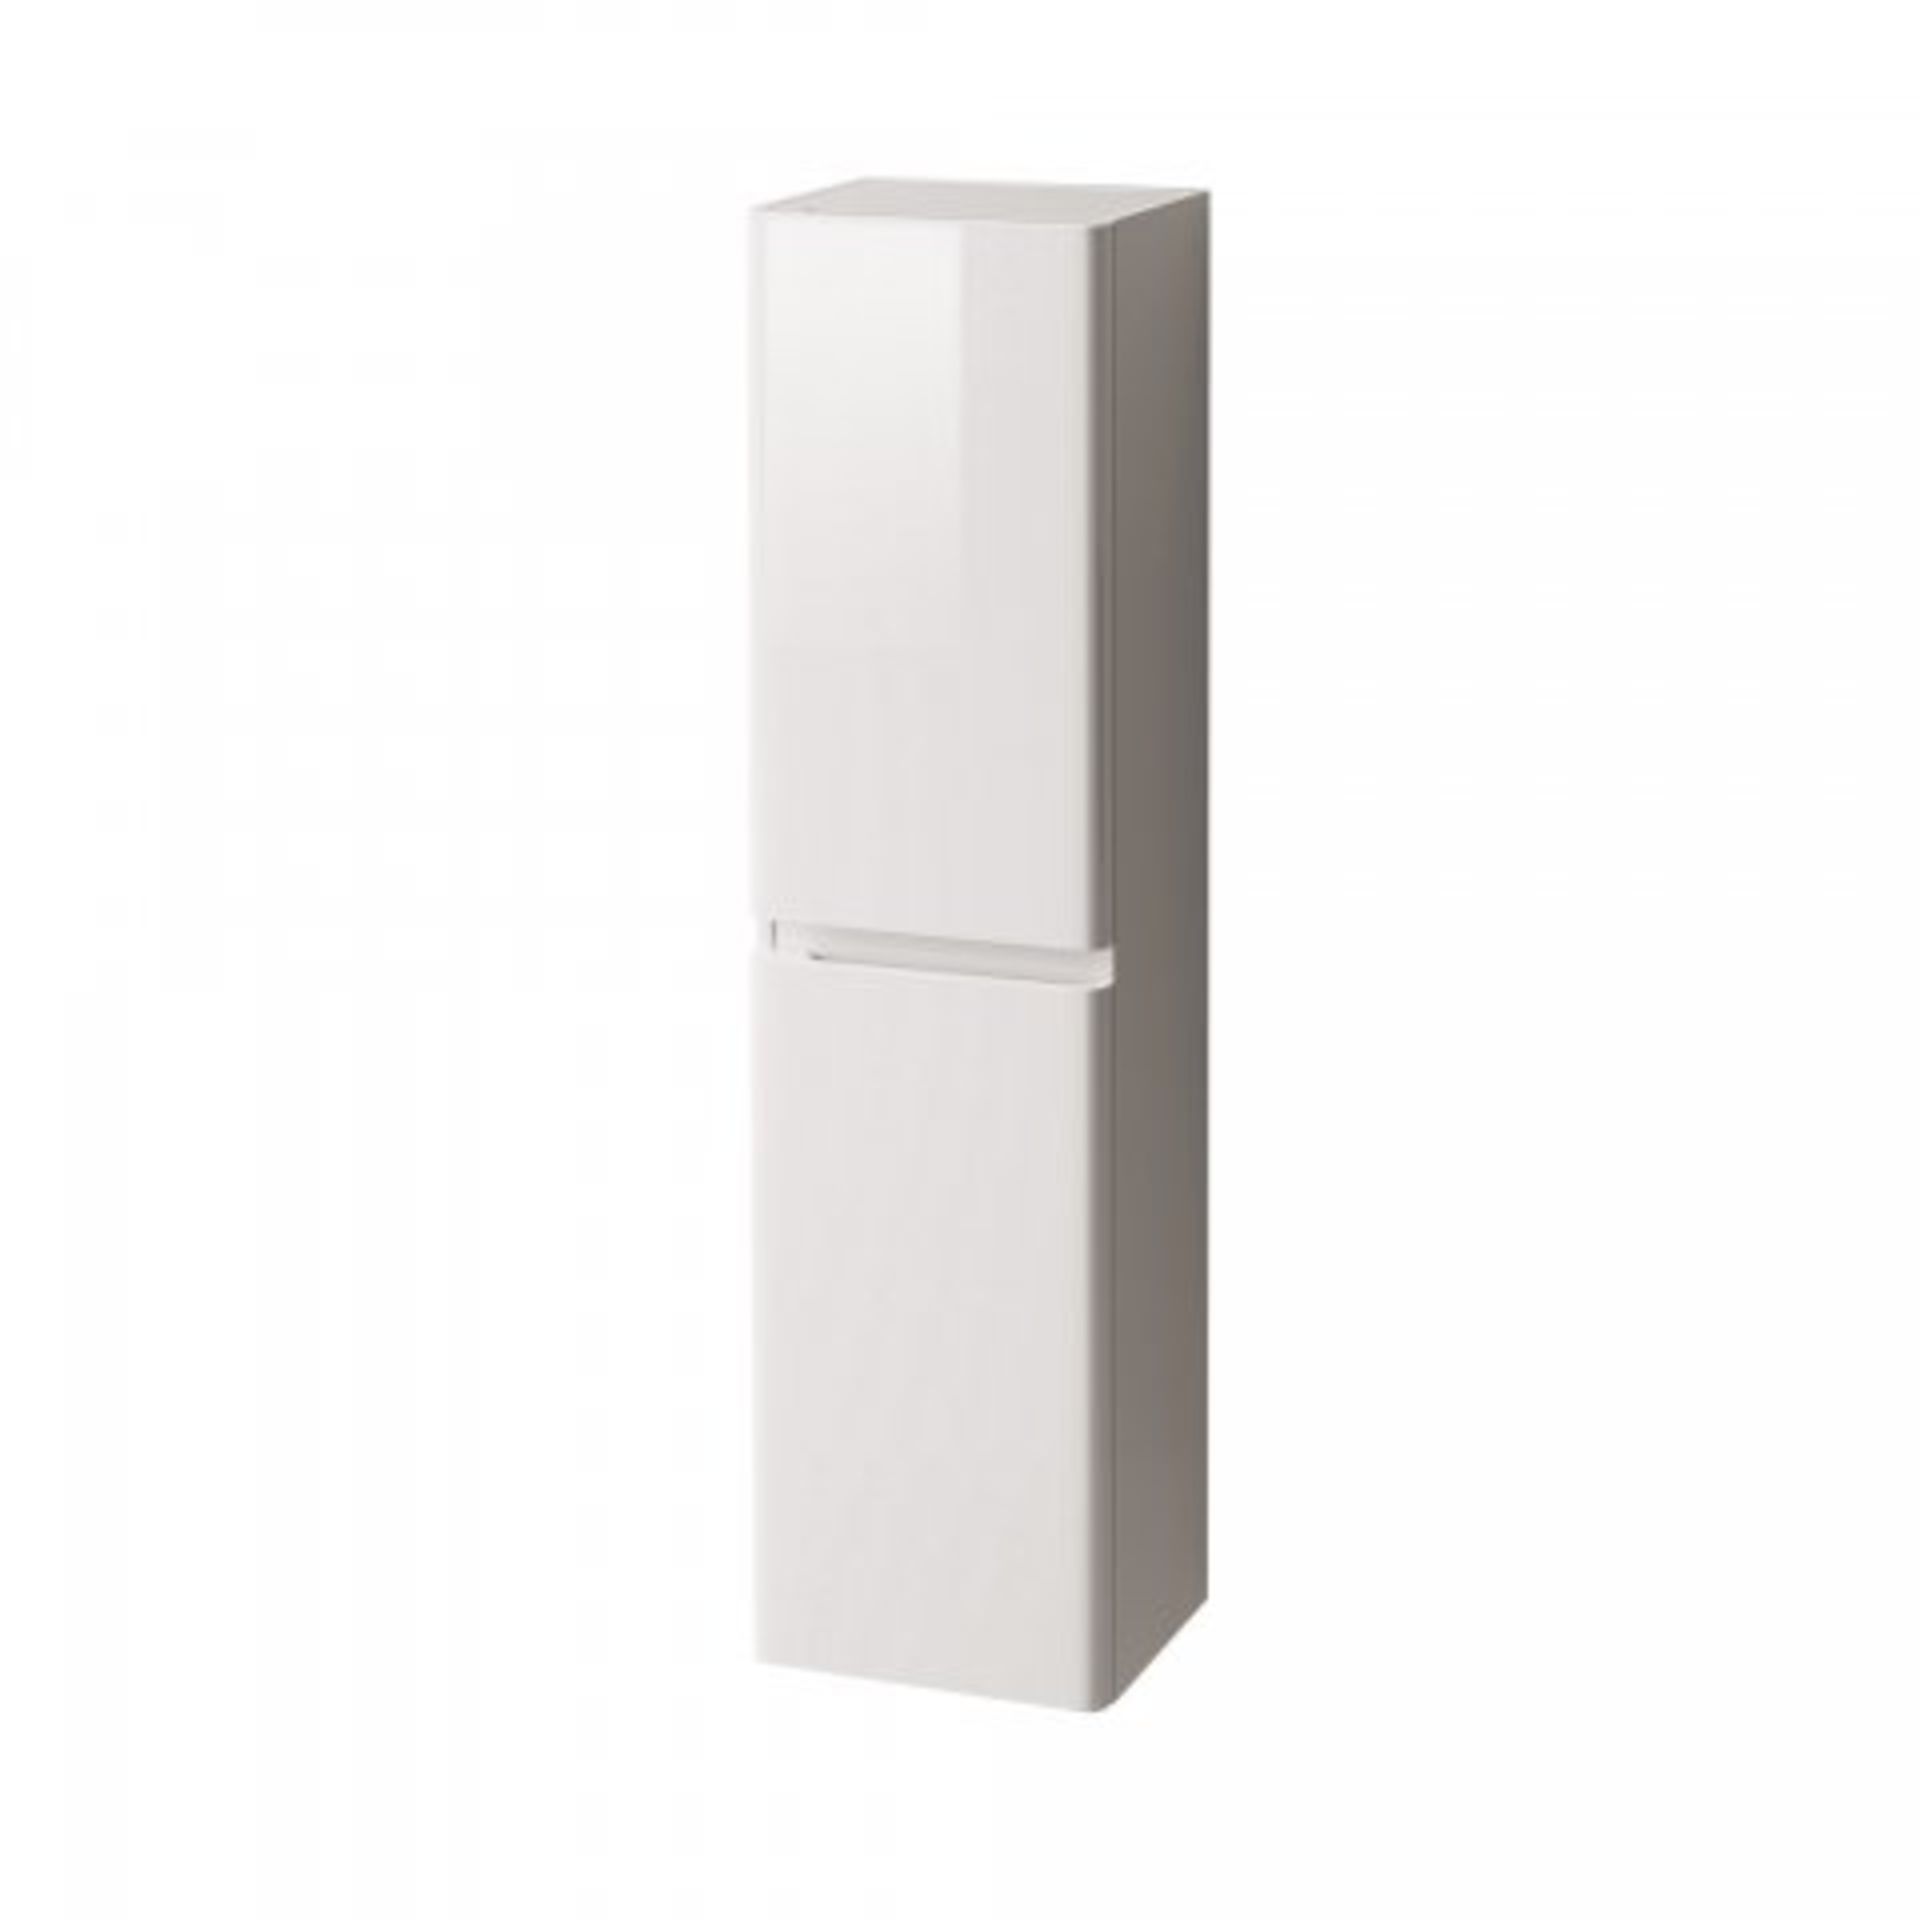 (P213) 1400mm Denver II Gloss Latte Tall Storage Cabinet - Wall Hung. RRP £299.99. With its - Image 4 of 5